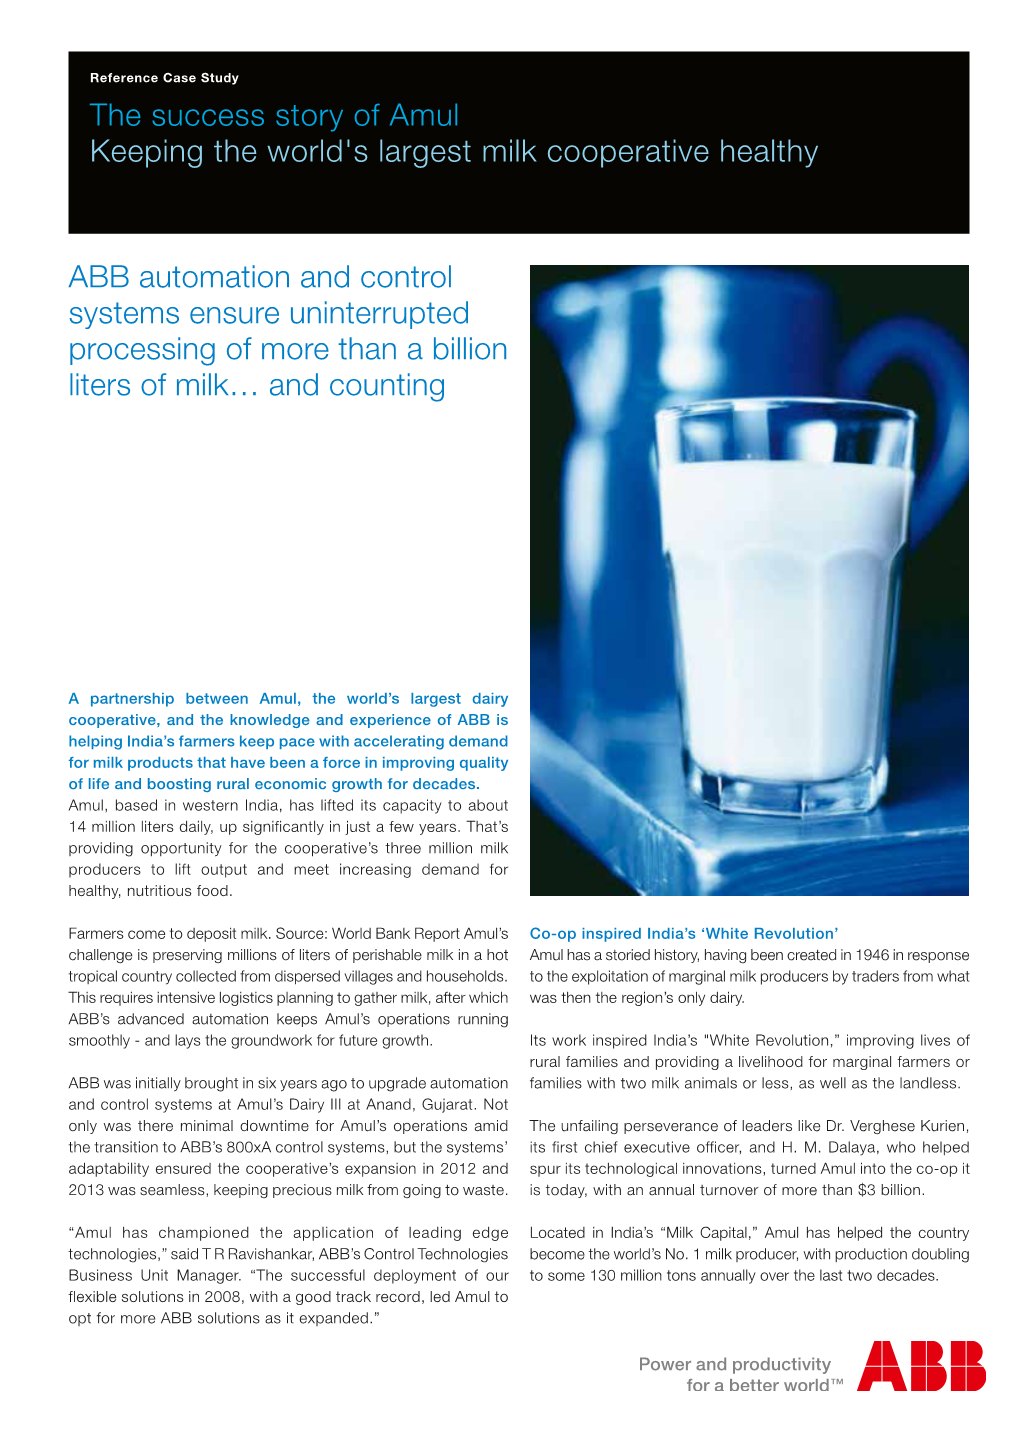 The Success Story of Amul Keeping the World's Largest Milk Cooperative Healthy